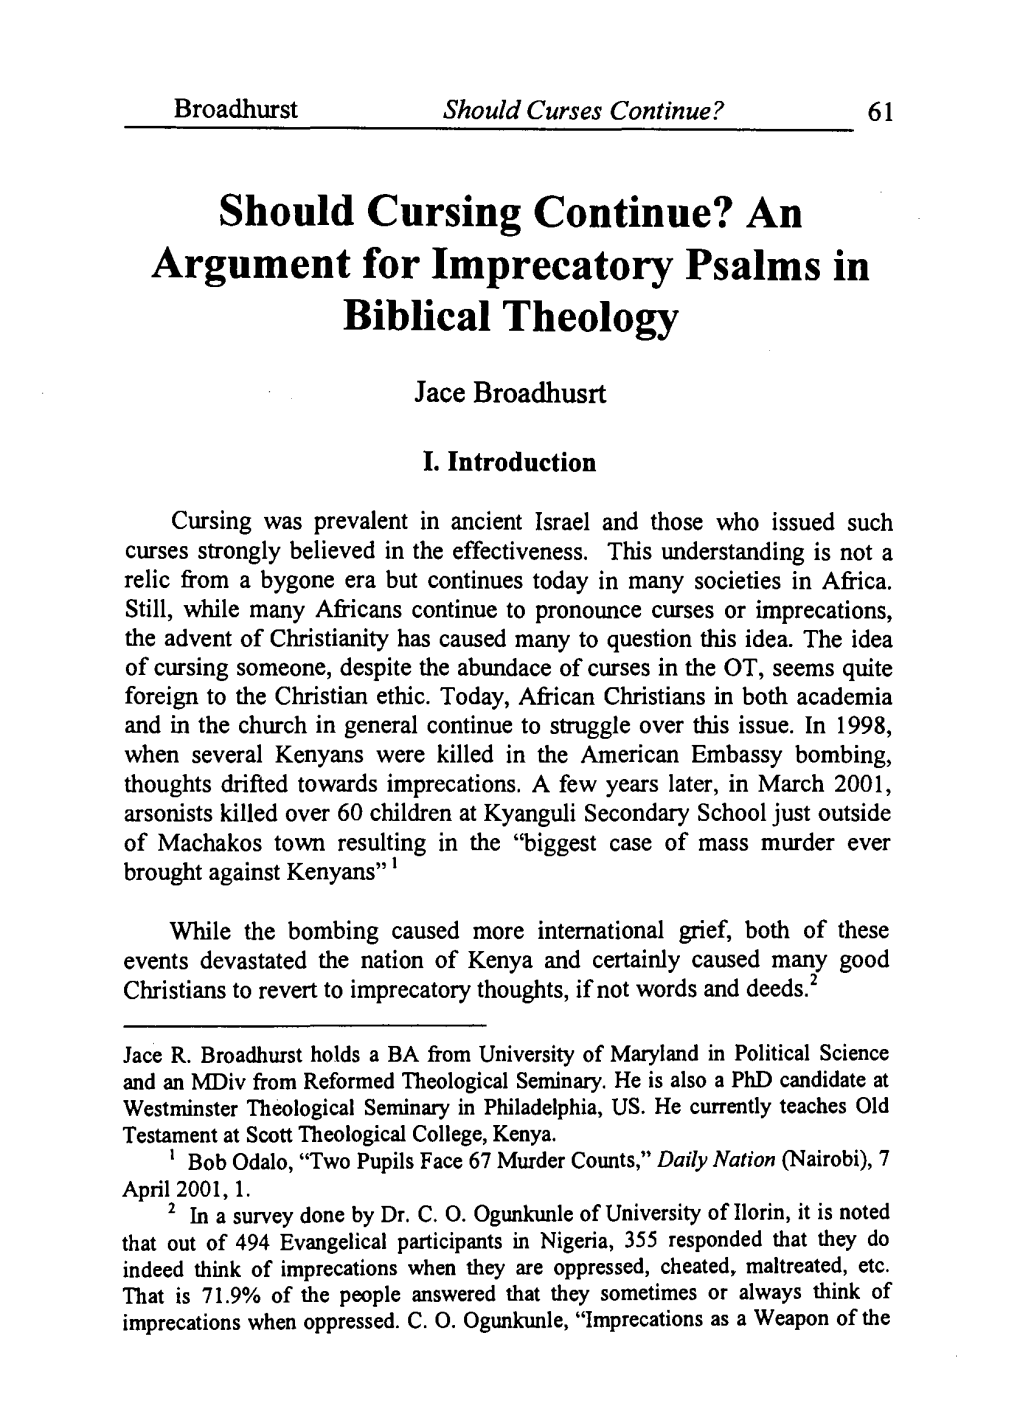 Should Cursing Continue? an Argument for Imprecatory Psalms in Biblical Theology